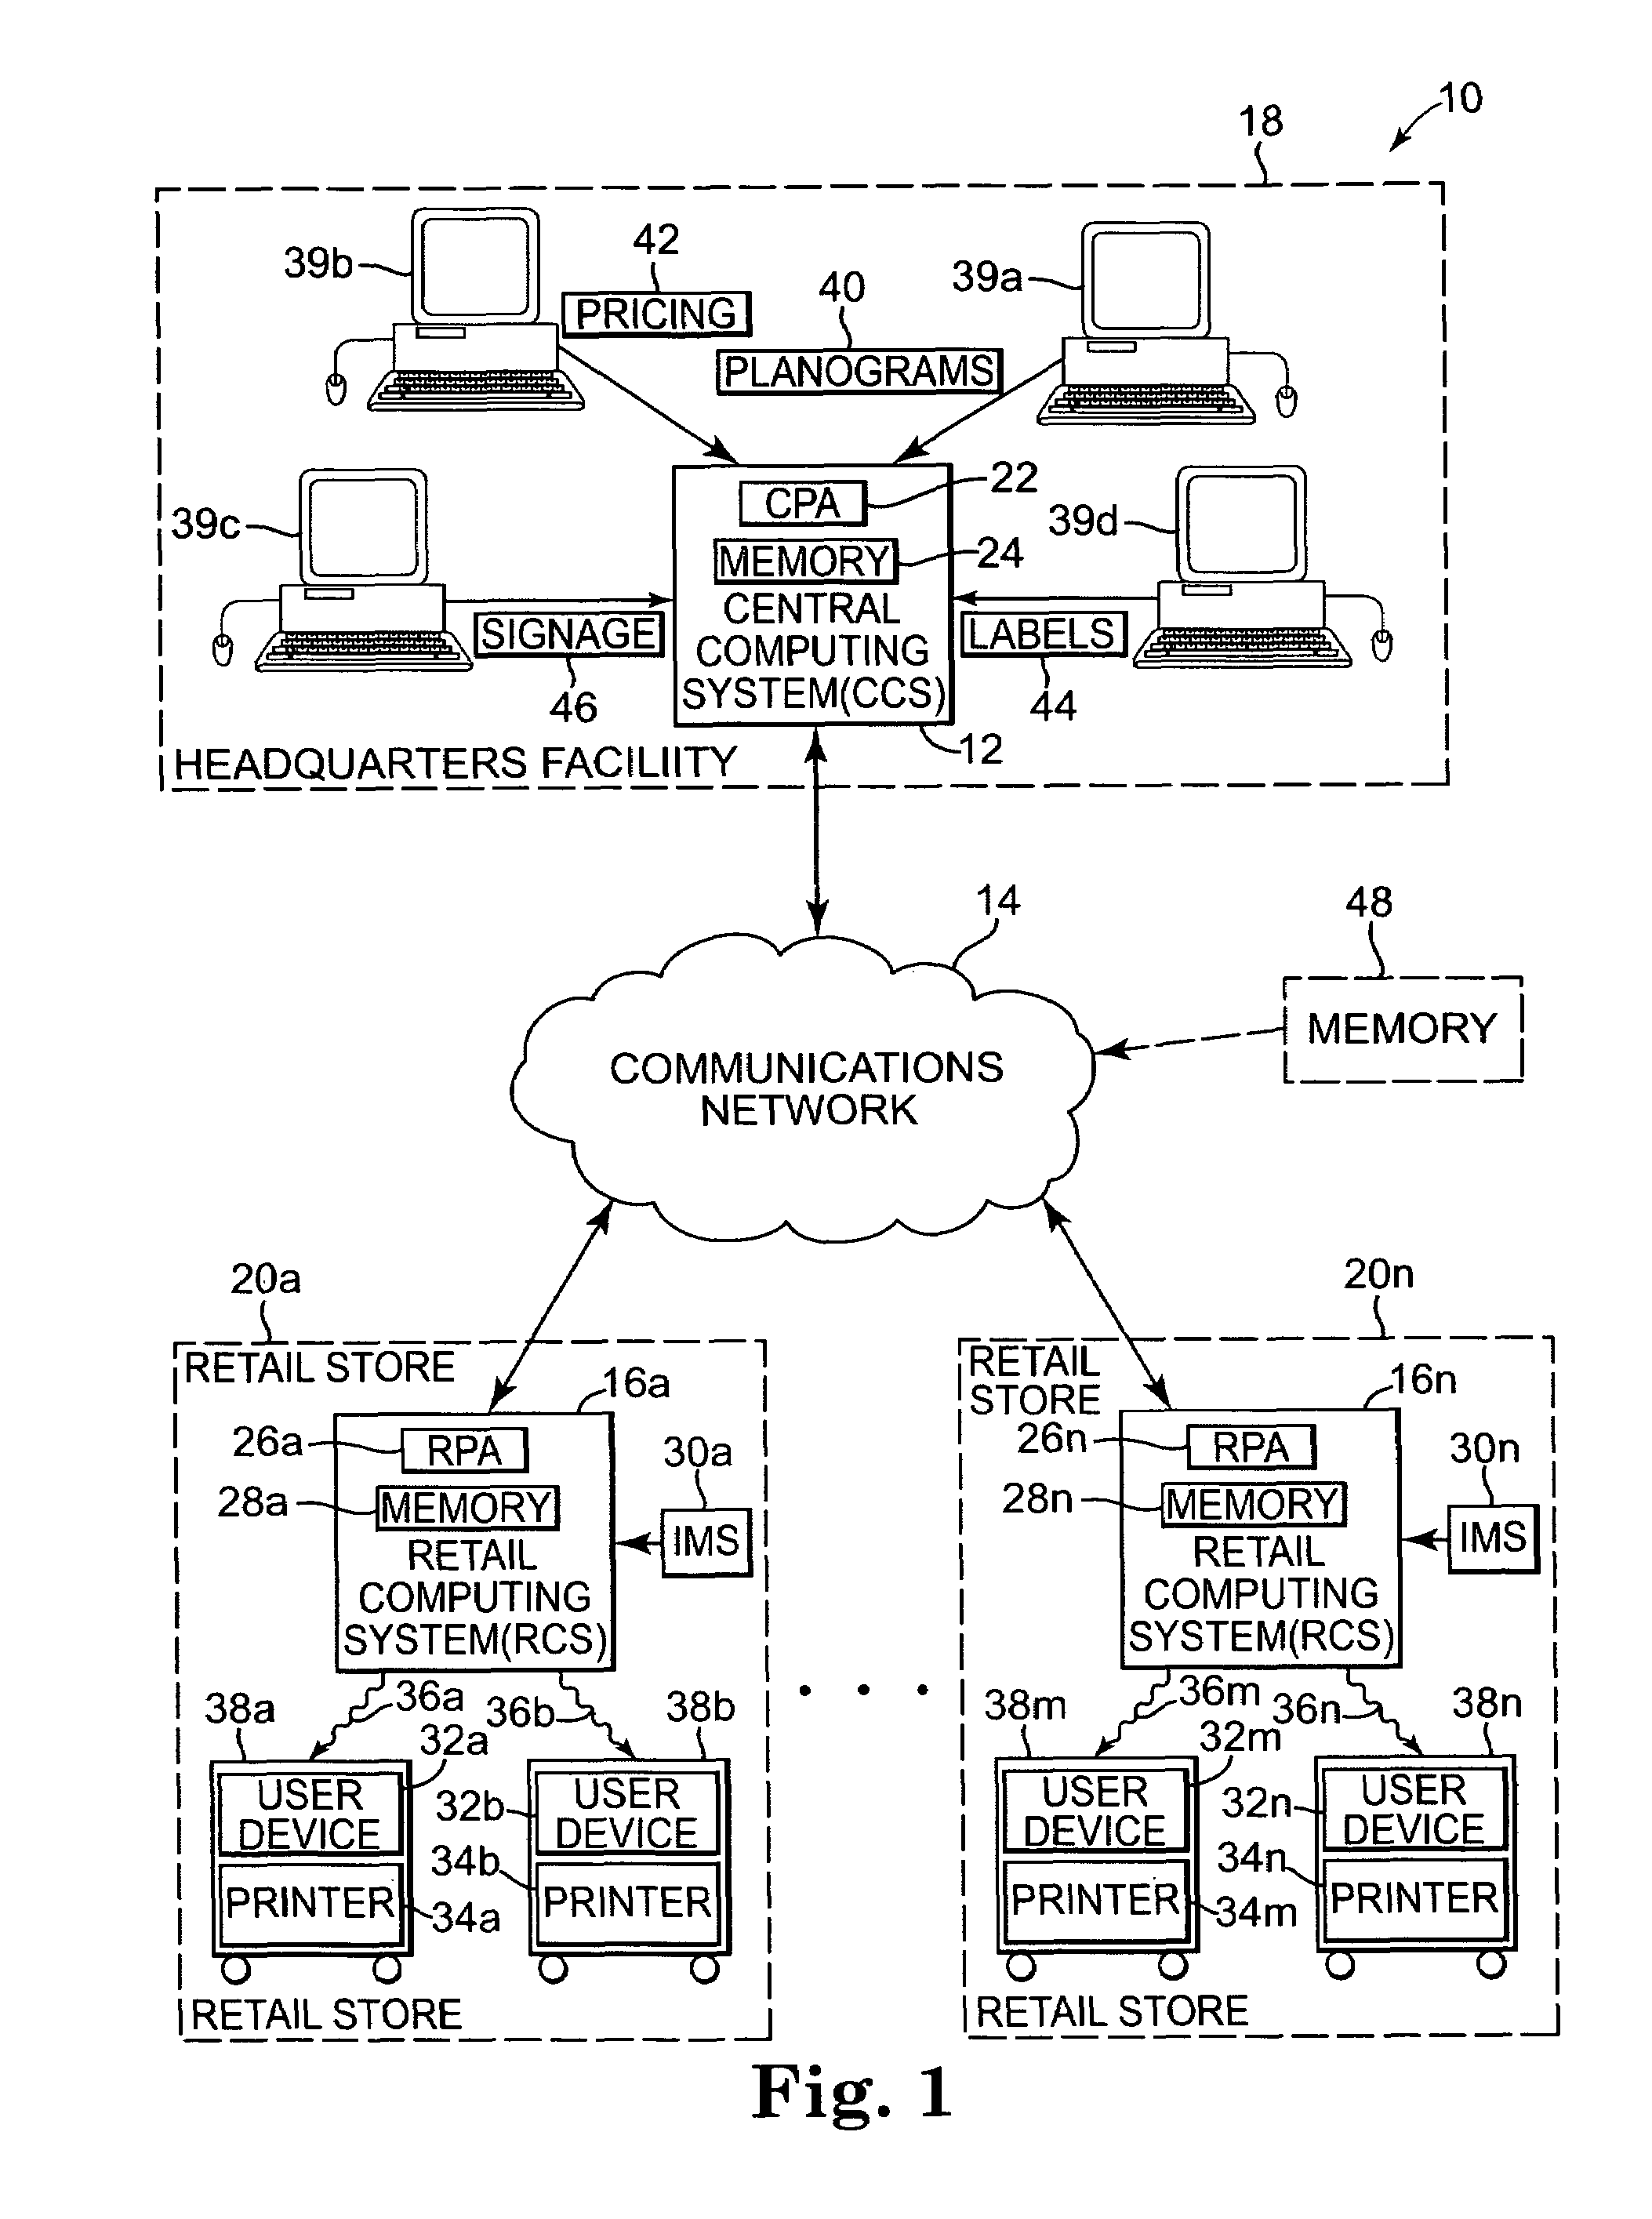 System and method for evaluating and recommending planograms